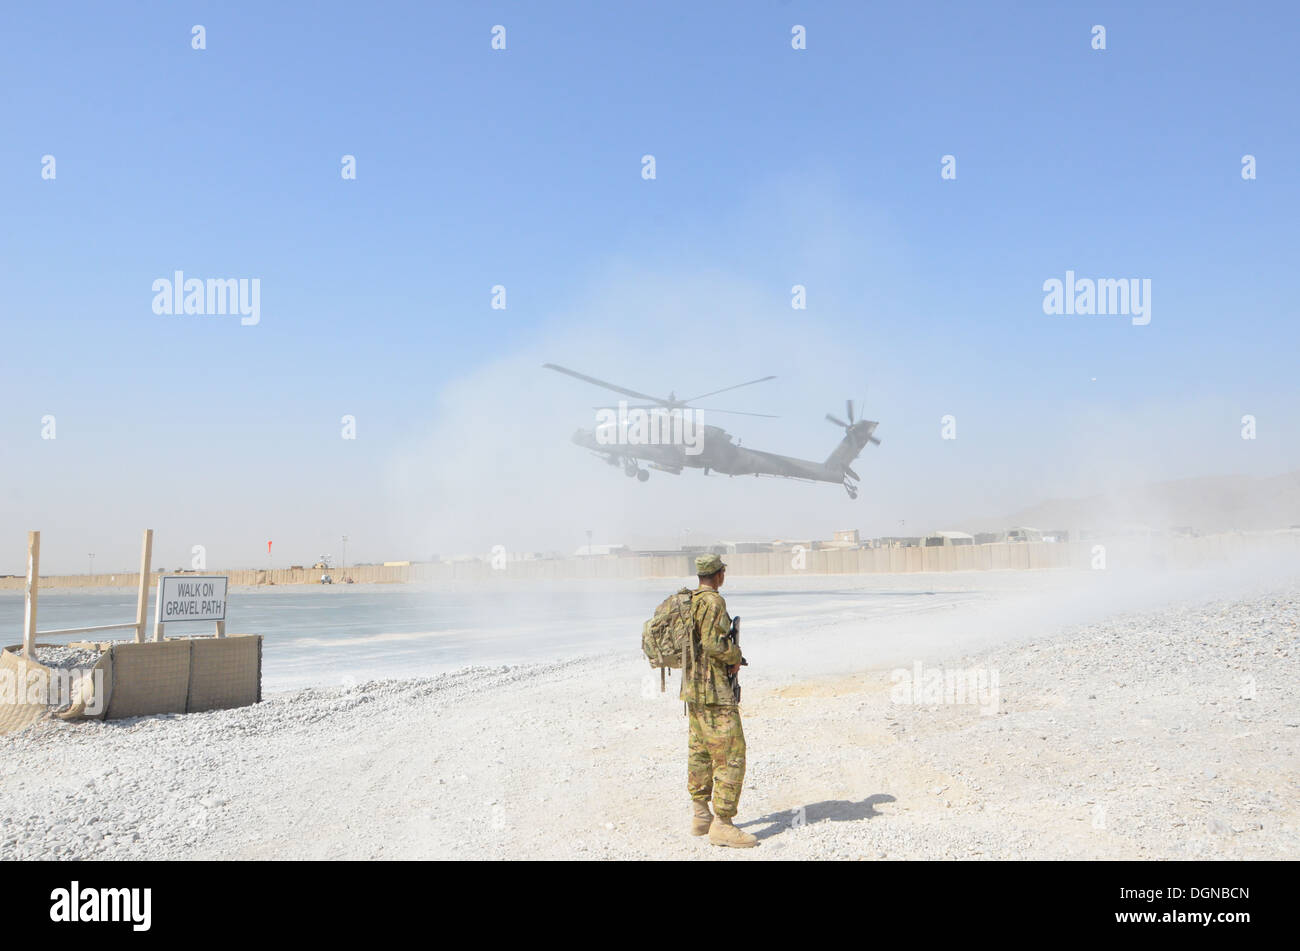 Specialist Daniel Johnson, a petroleum supply specialist with Troop E, Task Force Saber, 1st Combat Aviation Brigade, gets dusted by an AH-64D Apache helicopter practicing landings at Kandahar Airfield, Afghanistan Oct. 13, 2013. Stock Photo